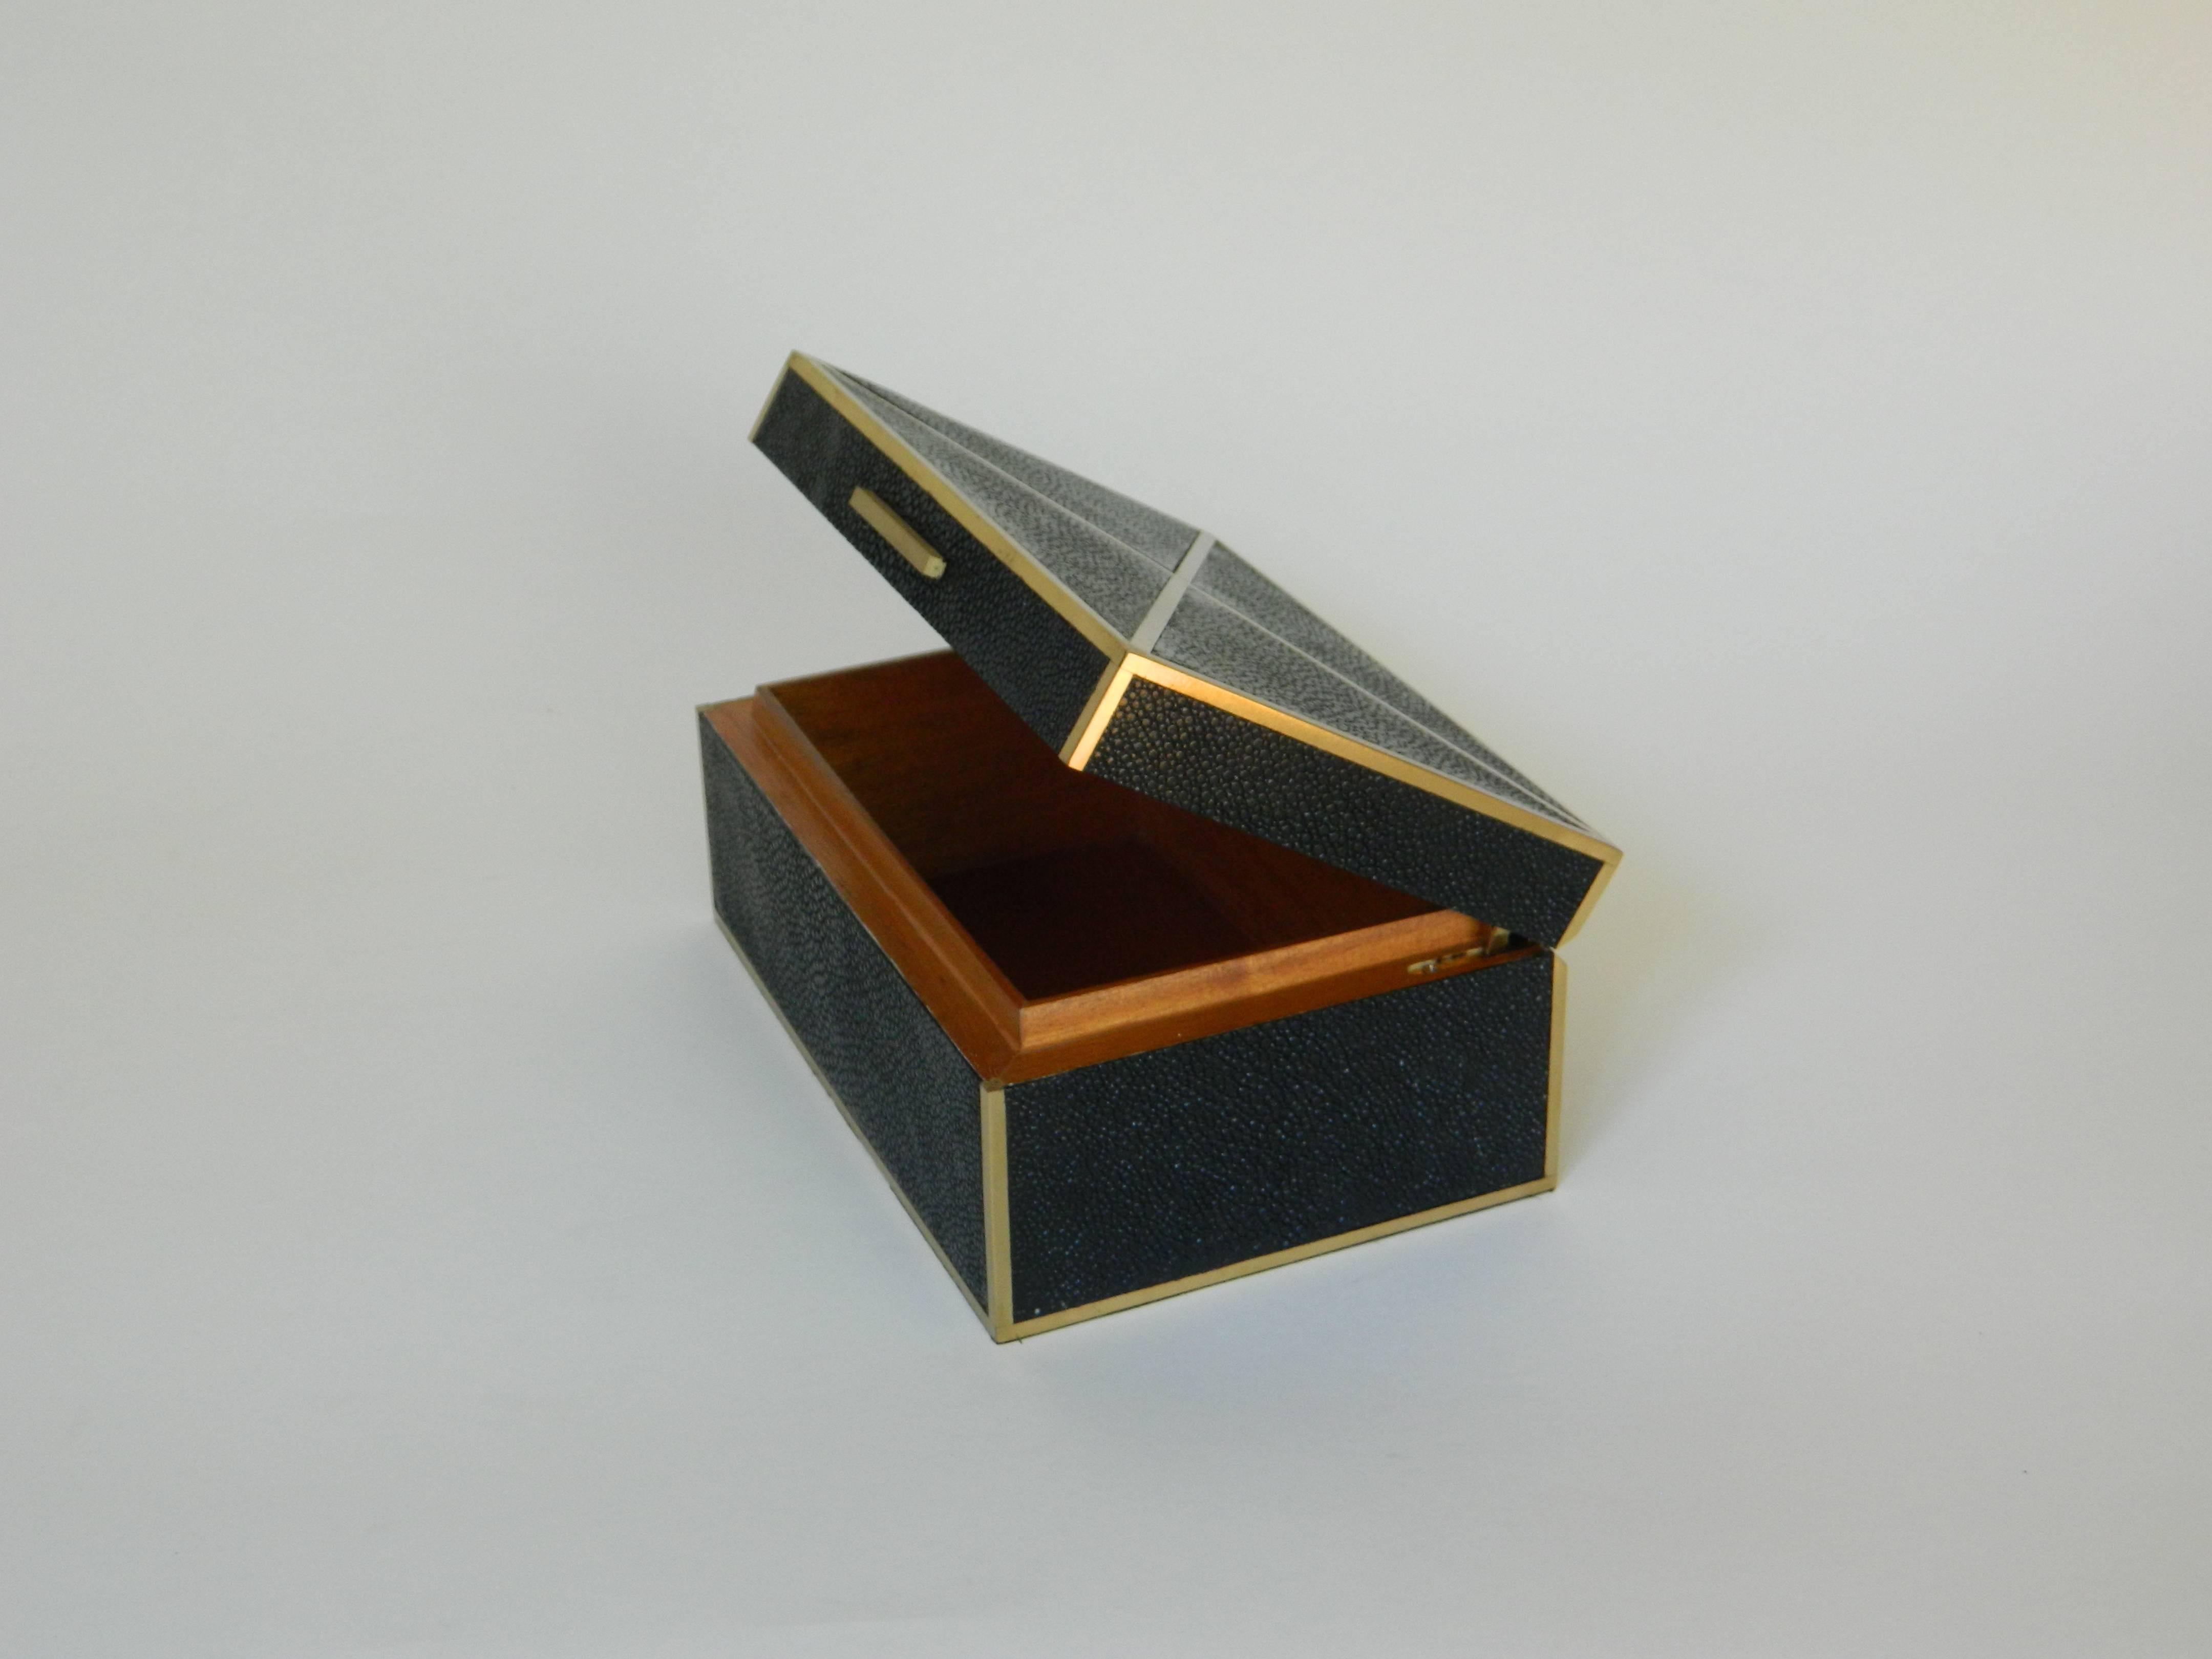 Black shagreen box with brass inlay
Galart specializes in boxes, humidors, trays, lamps and other high quality objects. 
We can custom make any shape, color and size.
 